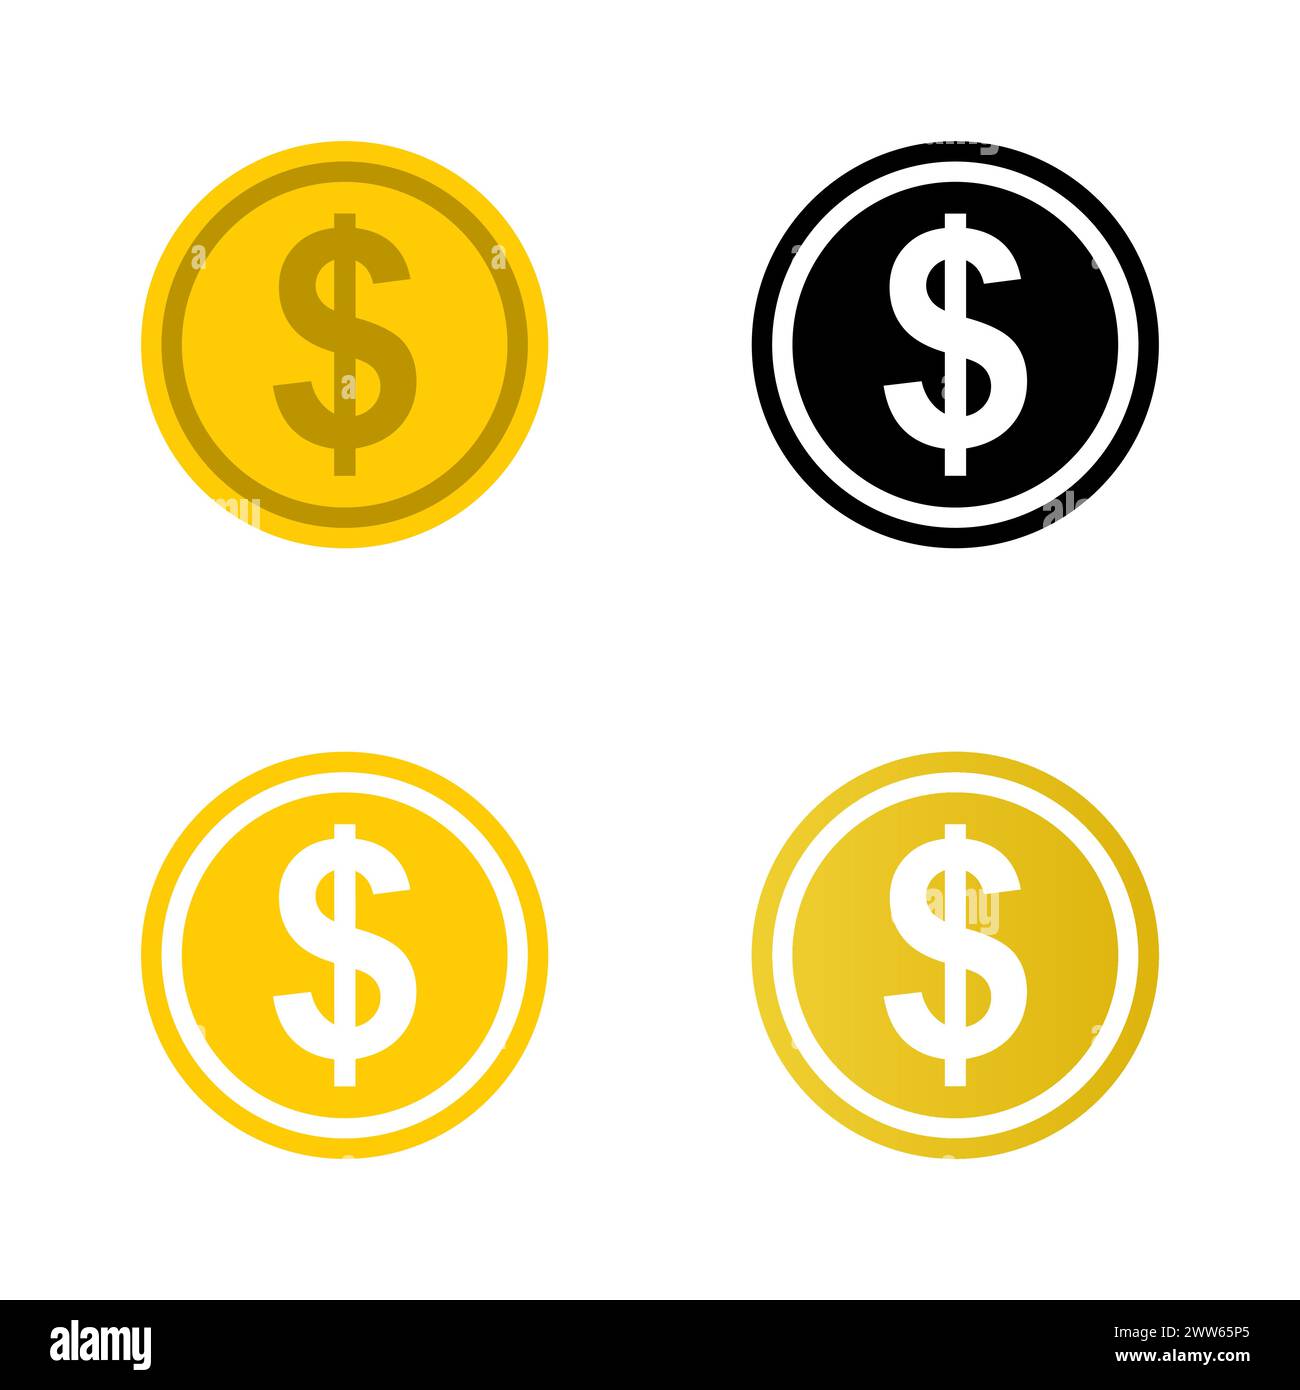 Dollar icon. Golden dollar coin and monochrome sketch. Vector currency, business and commerce, payment and profit symbol of economy and financial.Coin Stock Vector